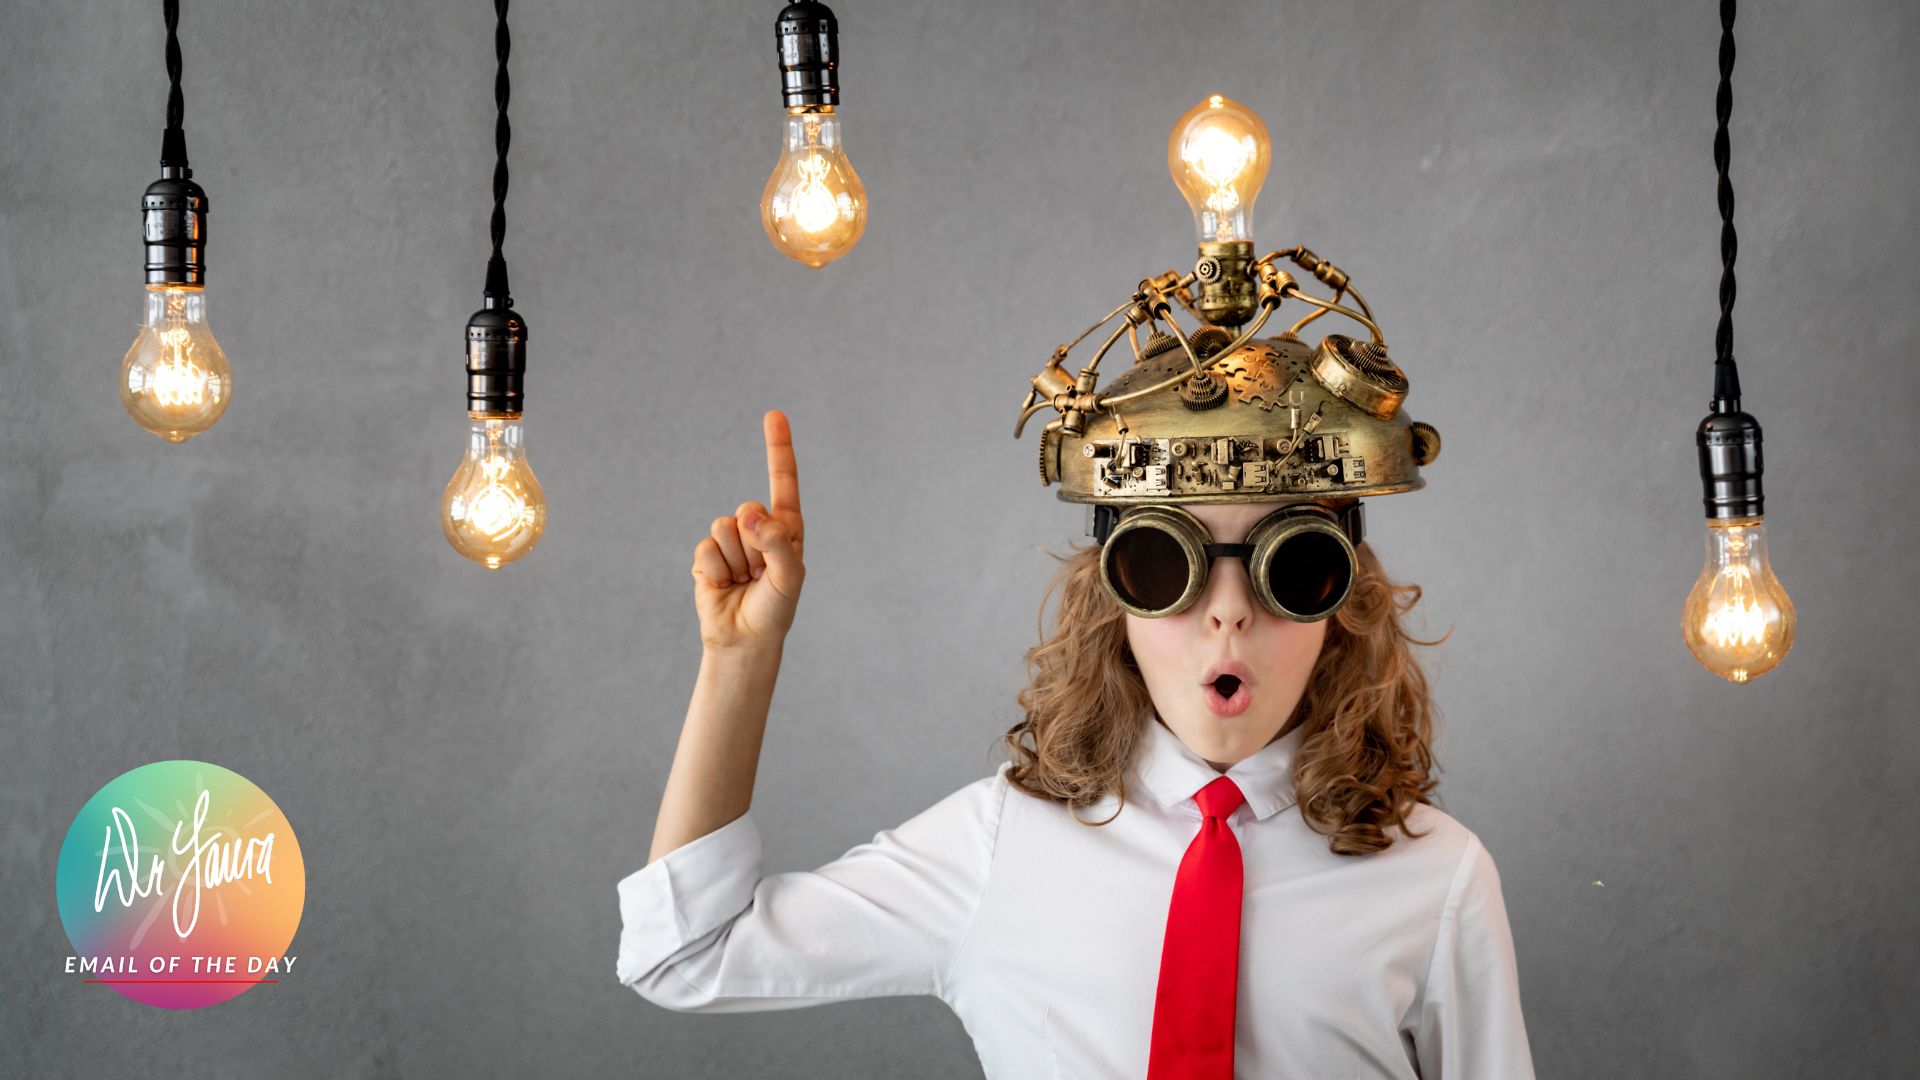 Young boy with steampunk glasses and brain cap opens mouth in surprise while pointing up to two hanging light bulbs